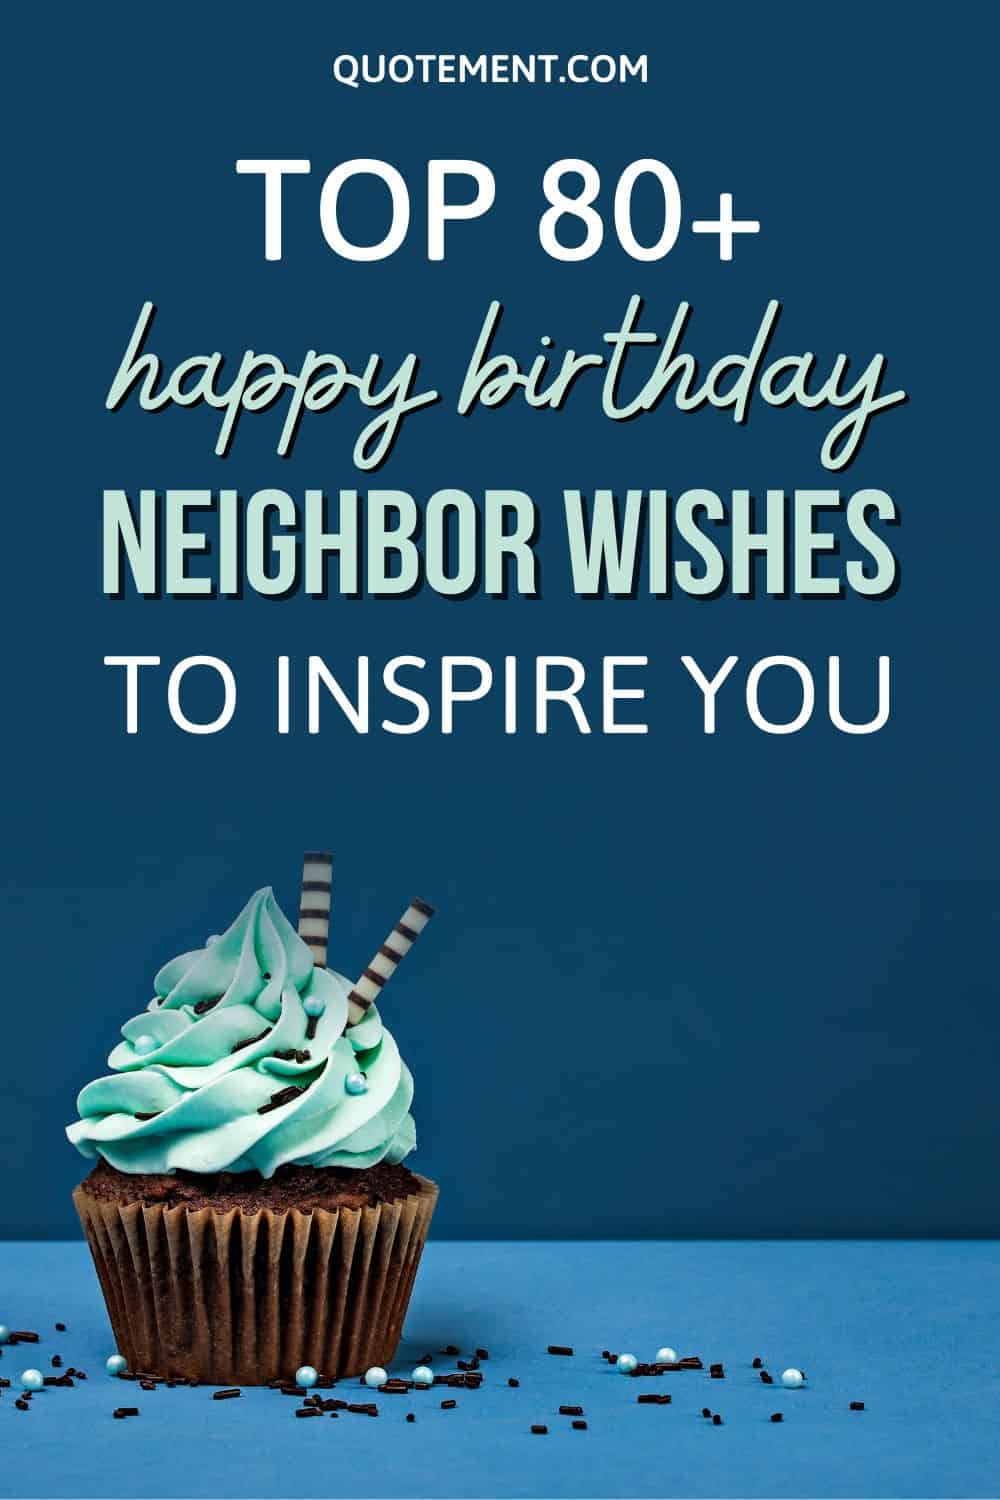 Top 80+ Happy Birthday Neighbor Wishes To Inspire You 